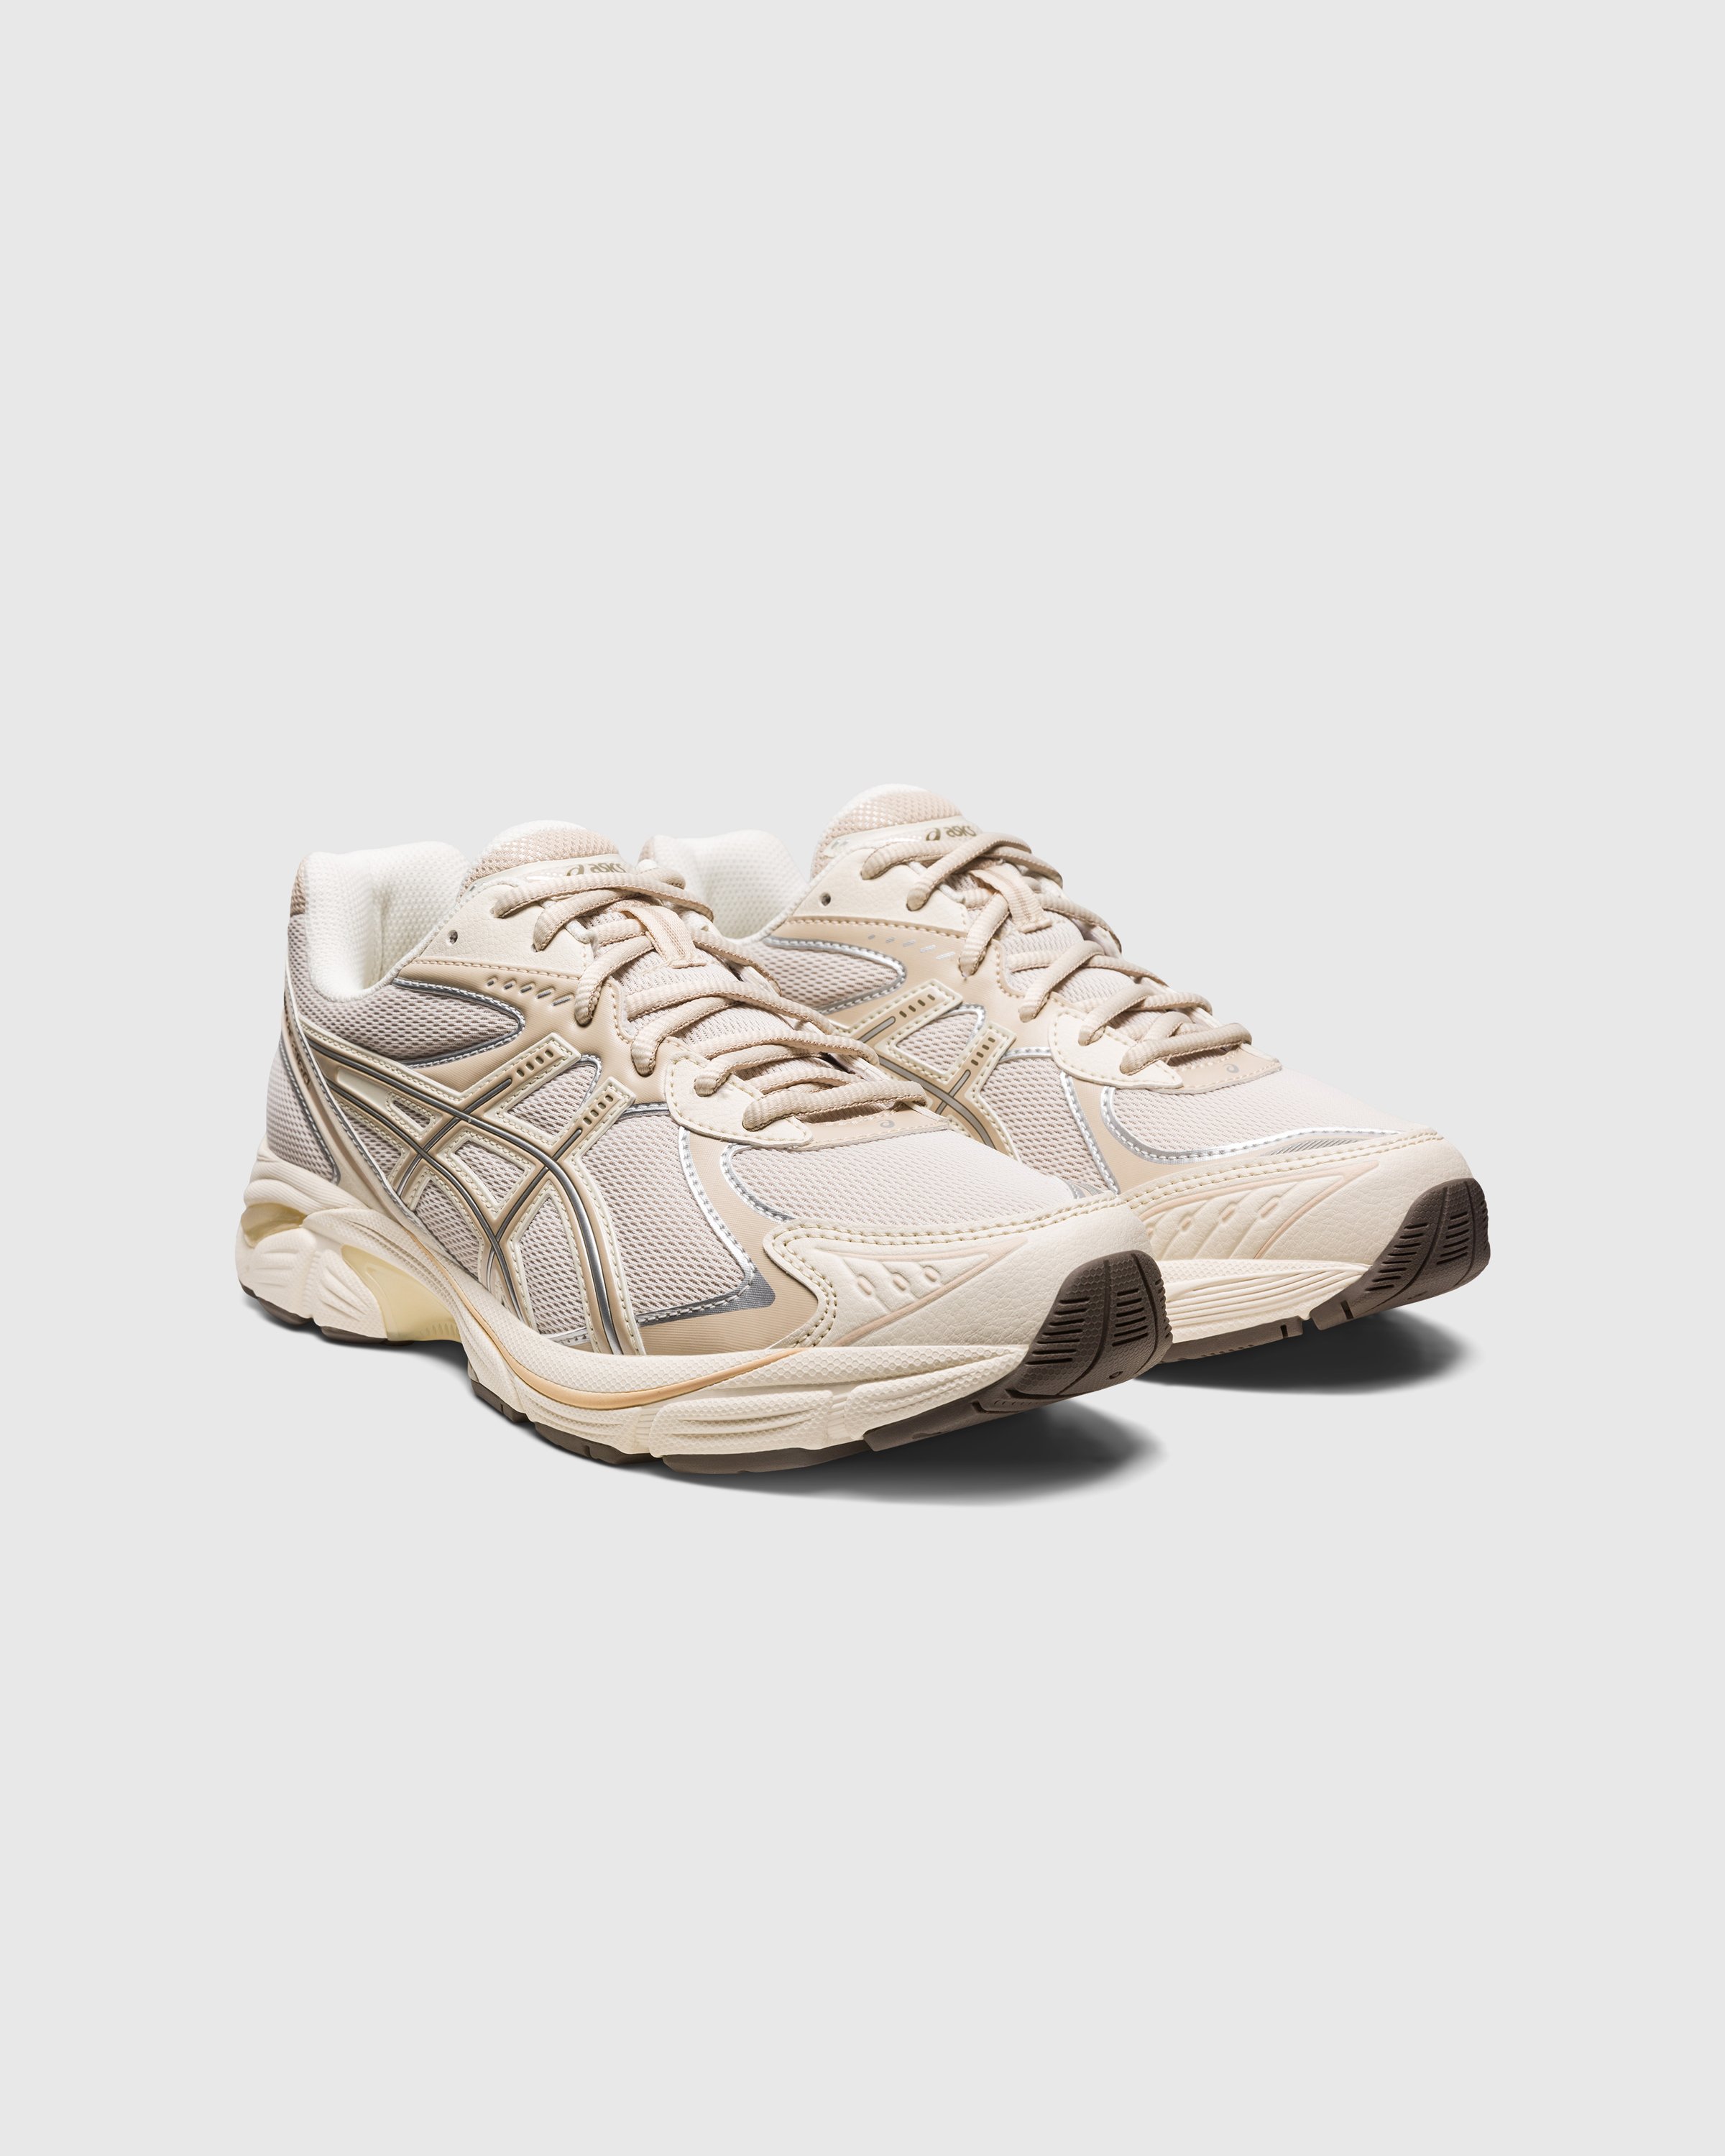 asics - GT-2160 Oatmeal/Simply Taupe - Footwear - Multi - Image 3